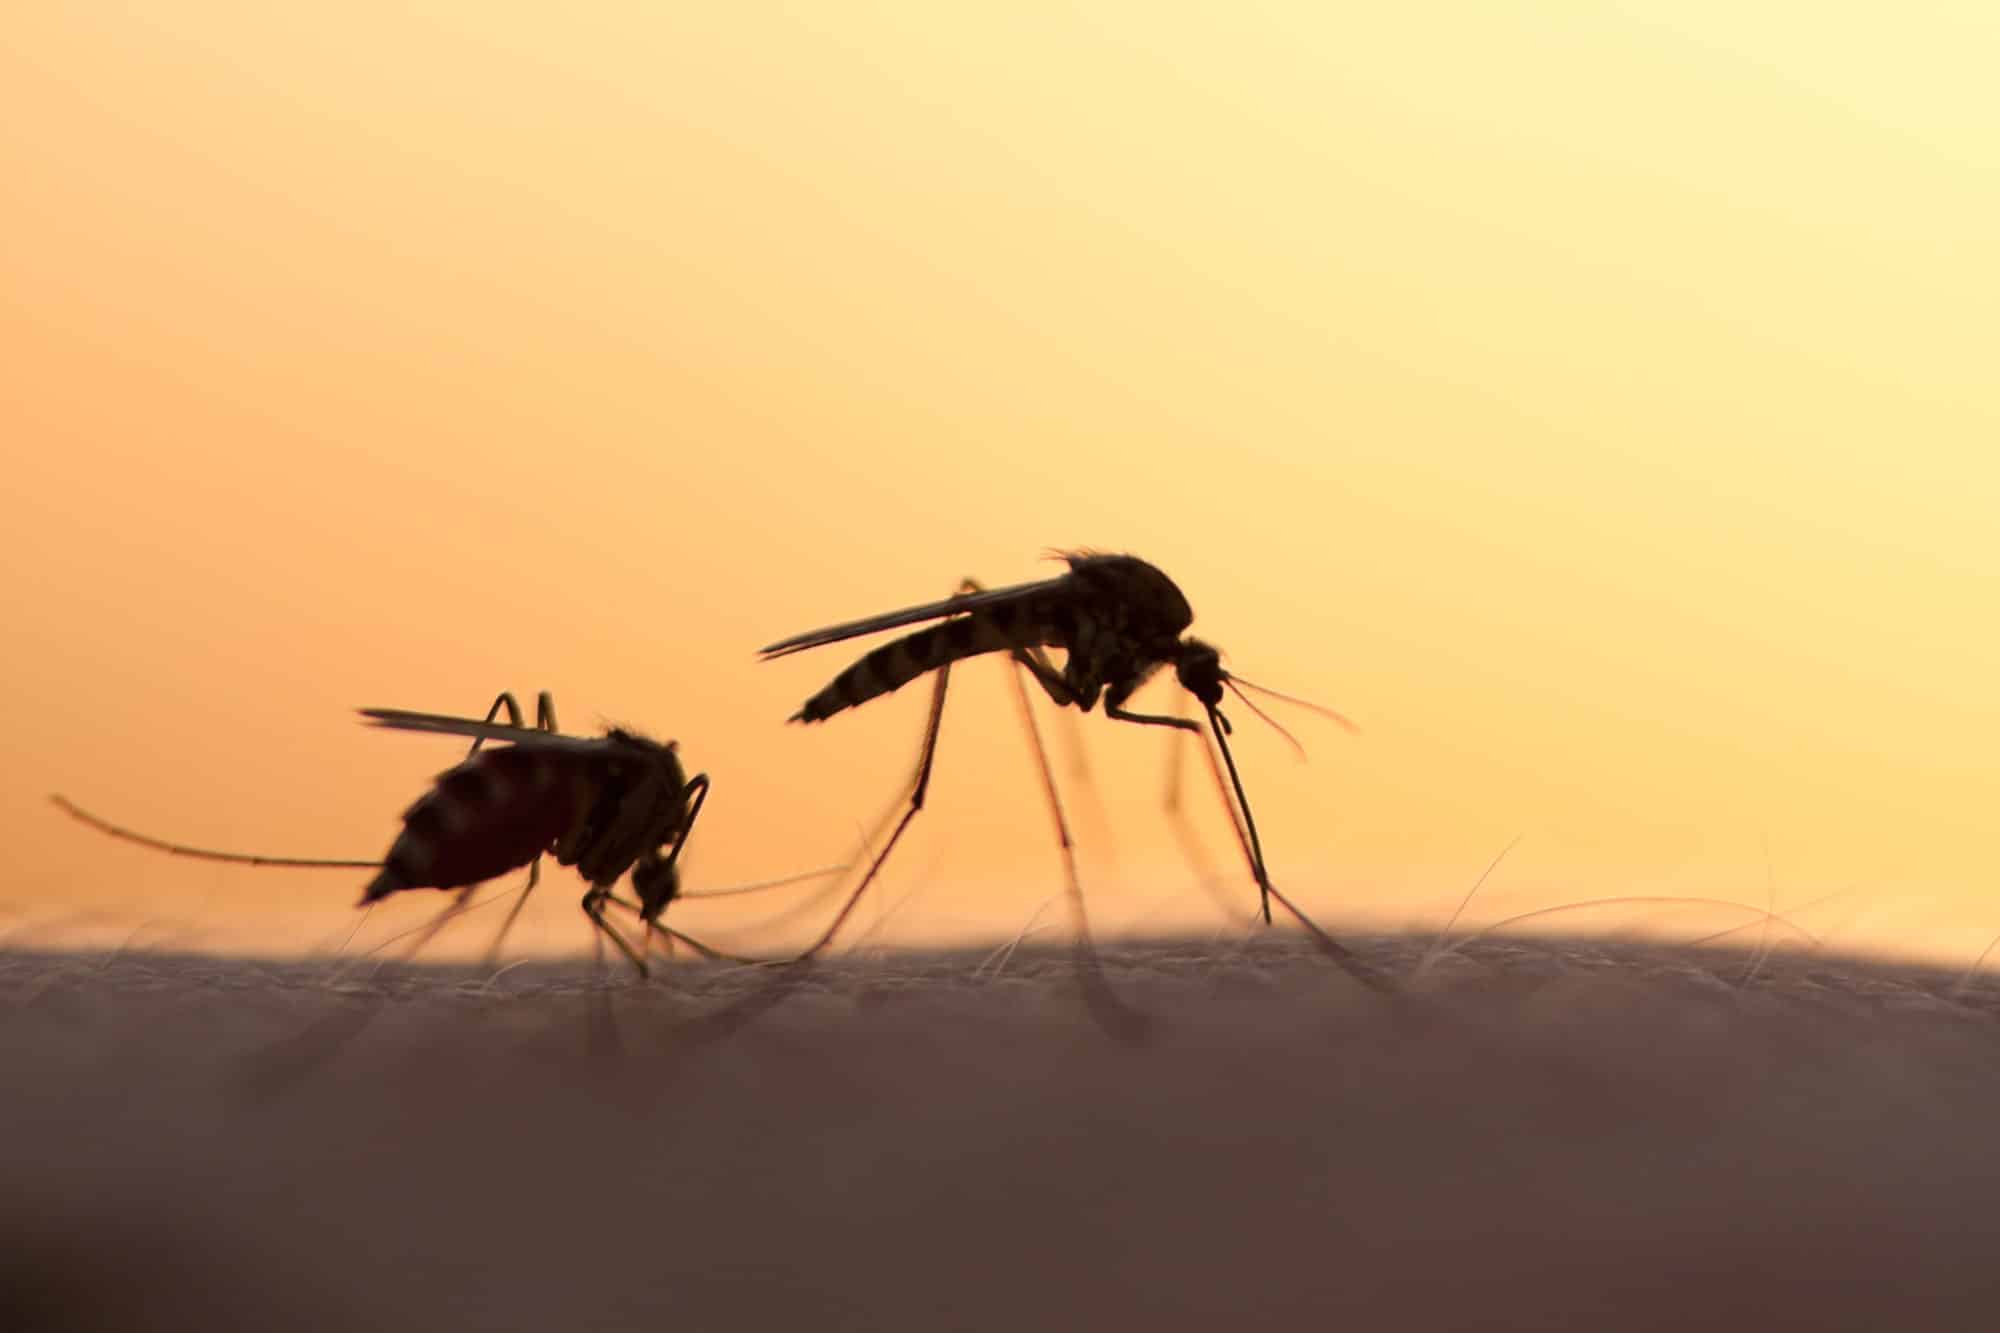 Not all mosquitoes are created equally